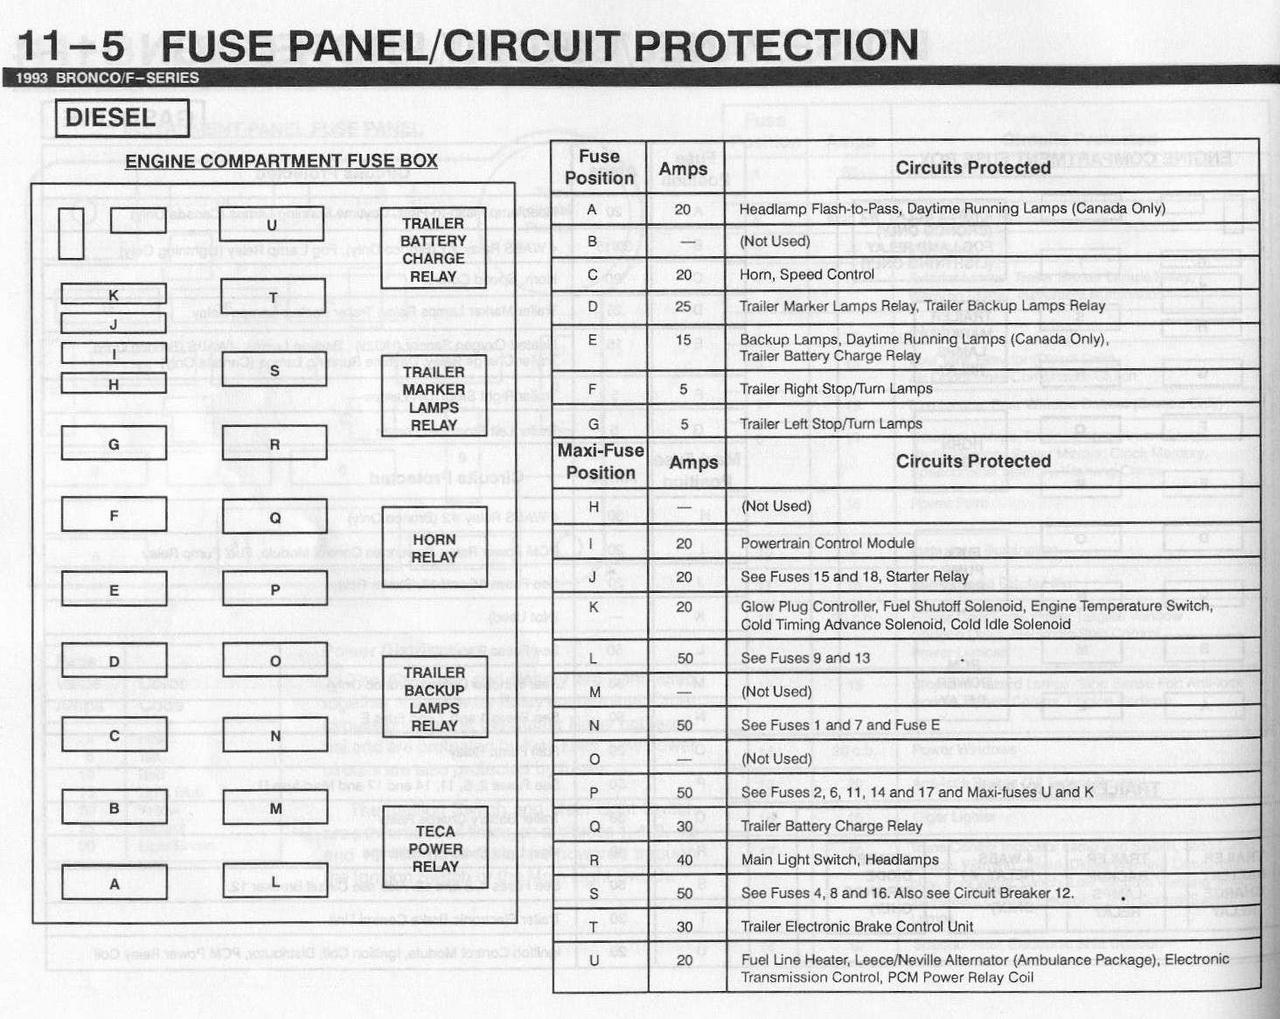 Fuse identification Help! - Ford Truck Enthusiasts Forums